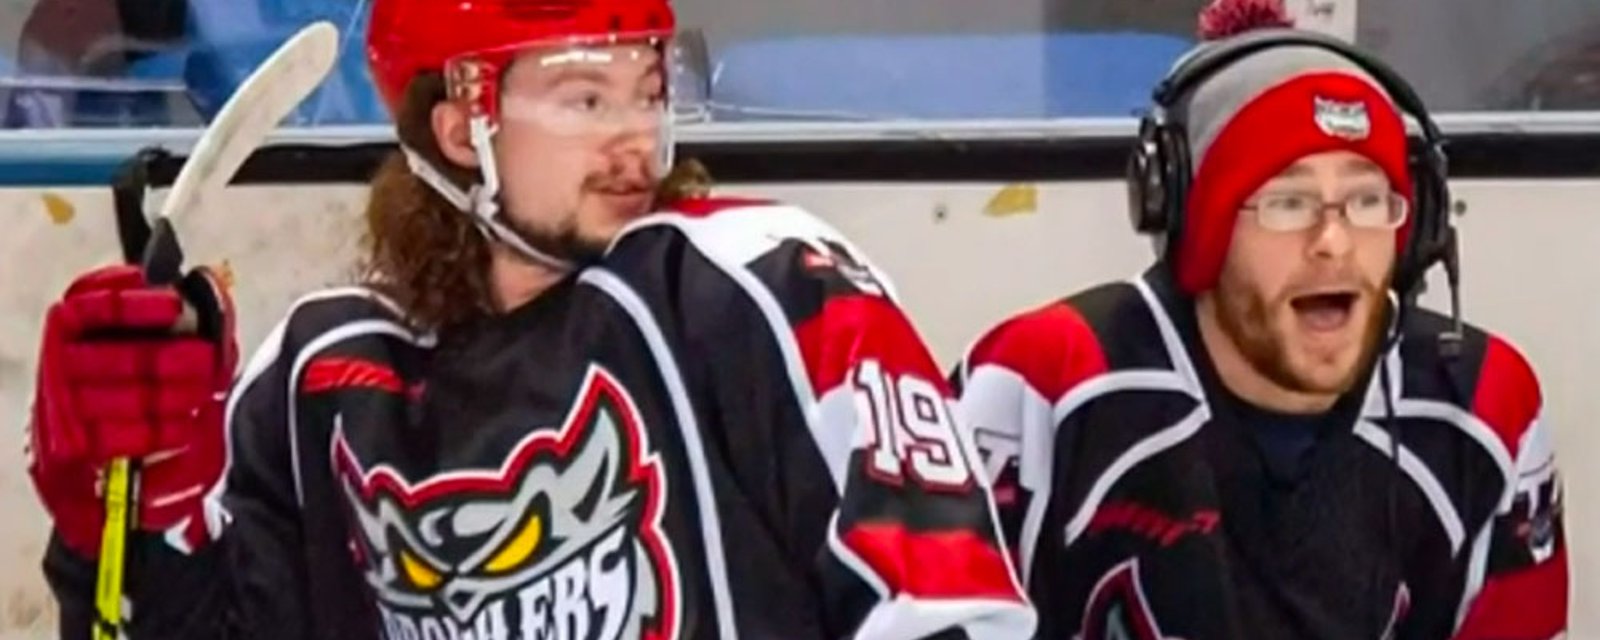 Broadcaster suits up for minor-league team when their backup goalie goes down with injury